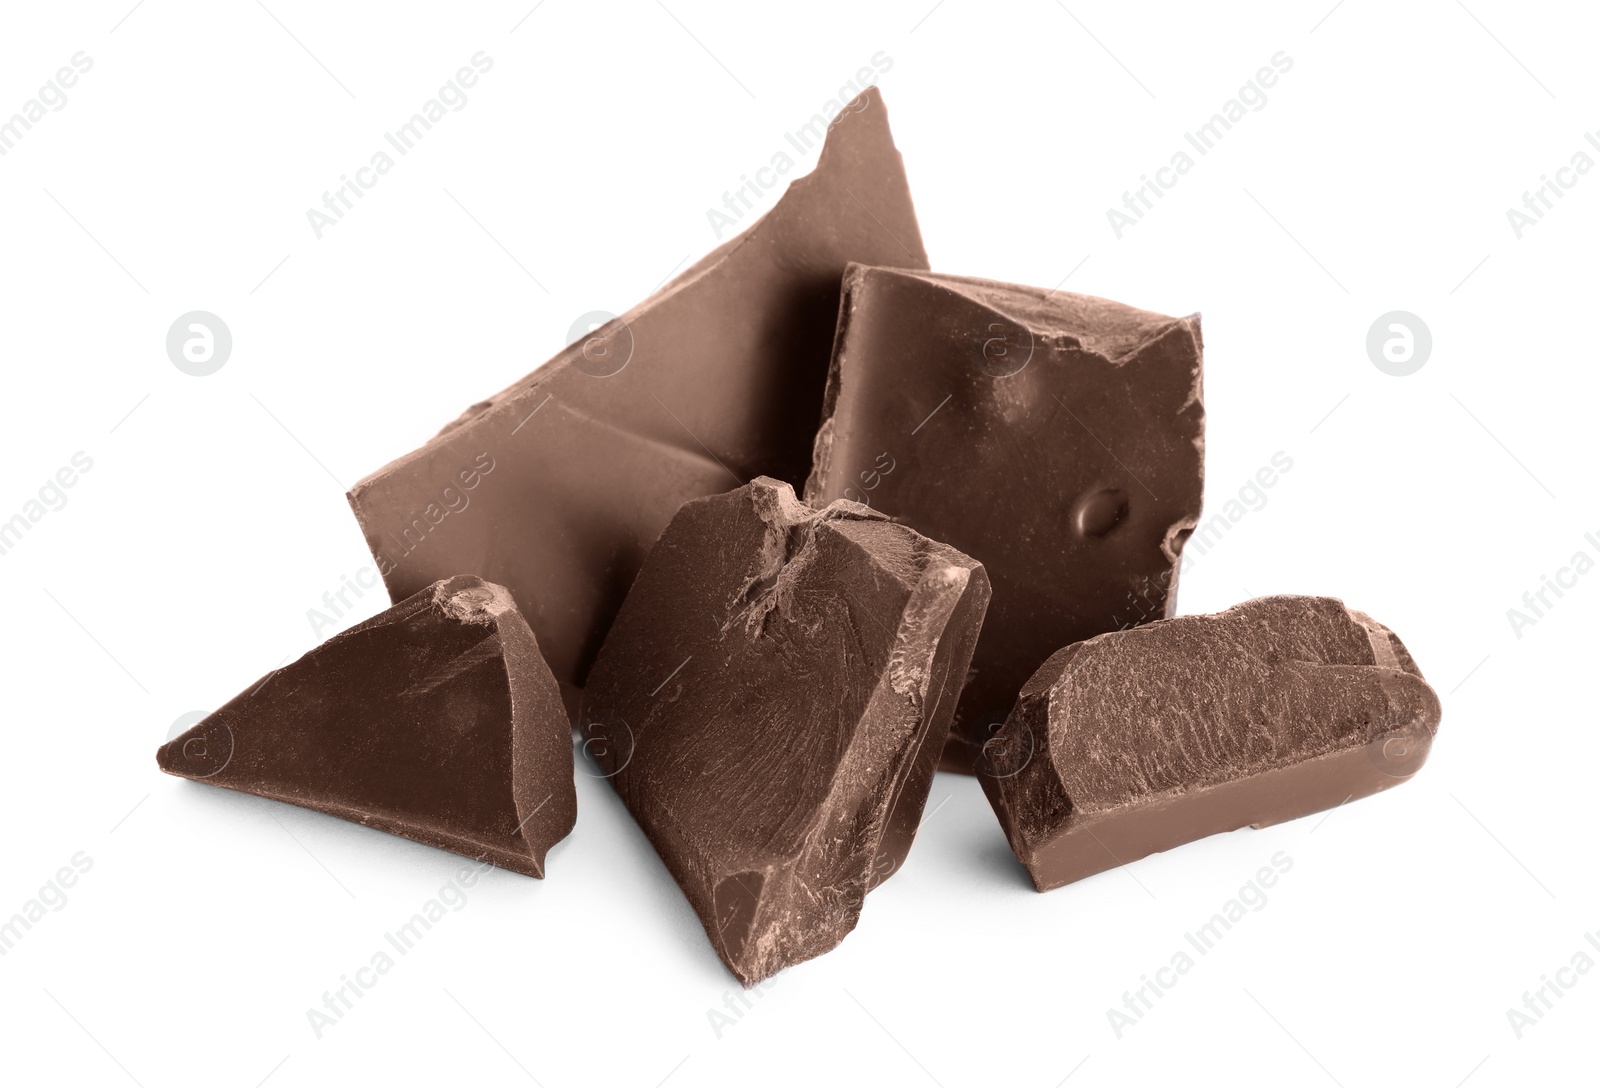 Photo of Pieces of dark chocolate isolated on white